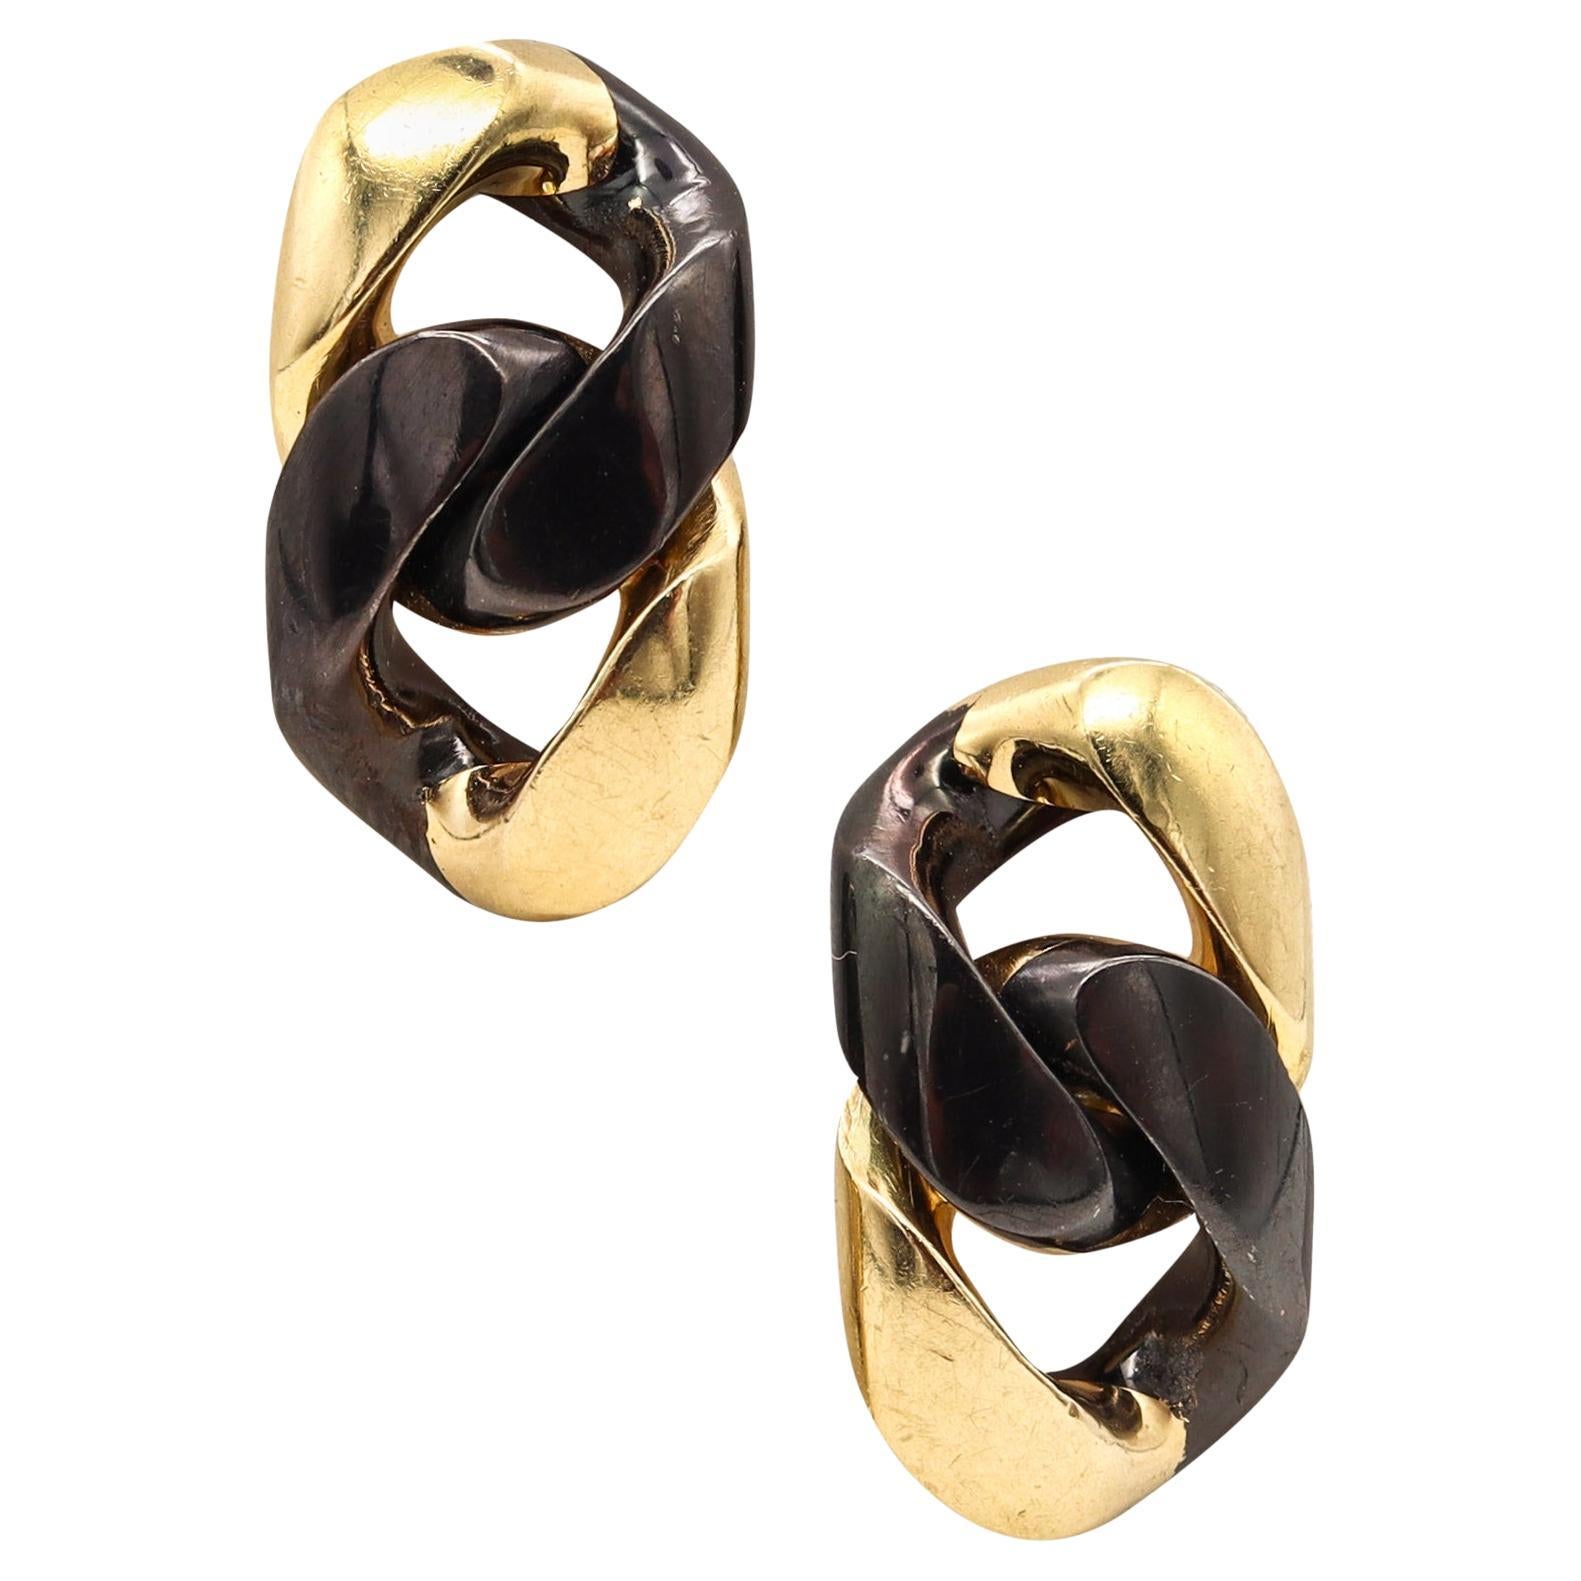 Paolo & Amedeo Bottoli Verona Double Links Earrings in Two Tones of 18kt Gold